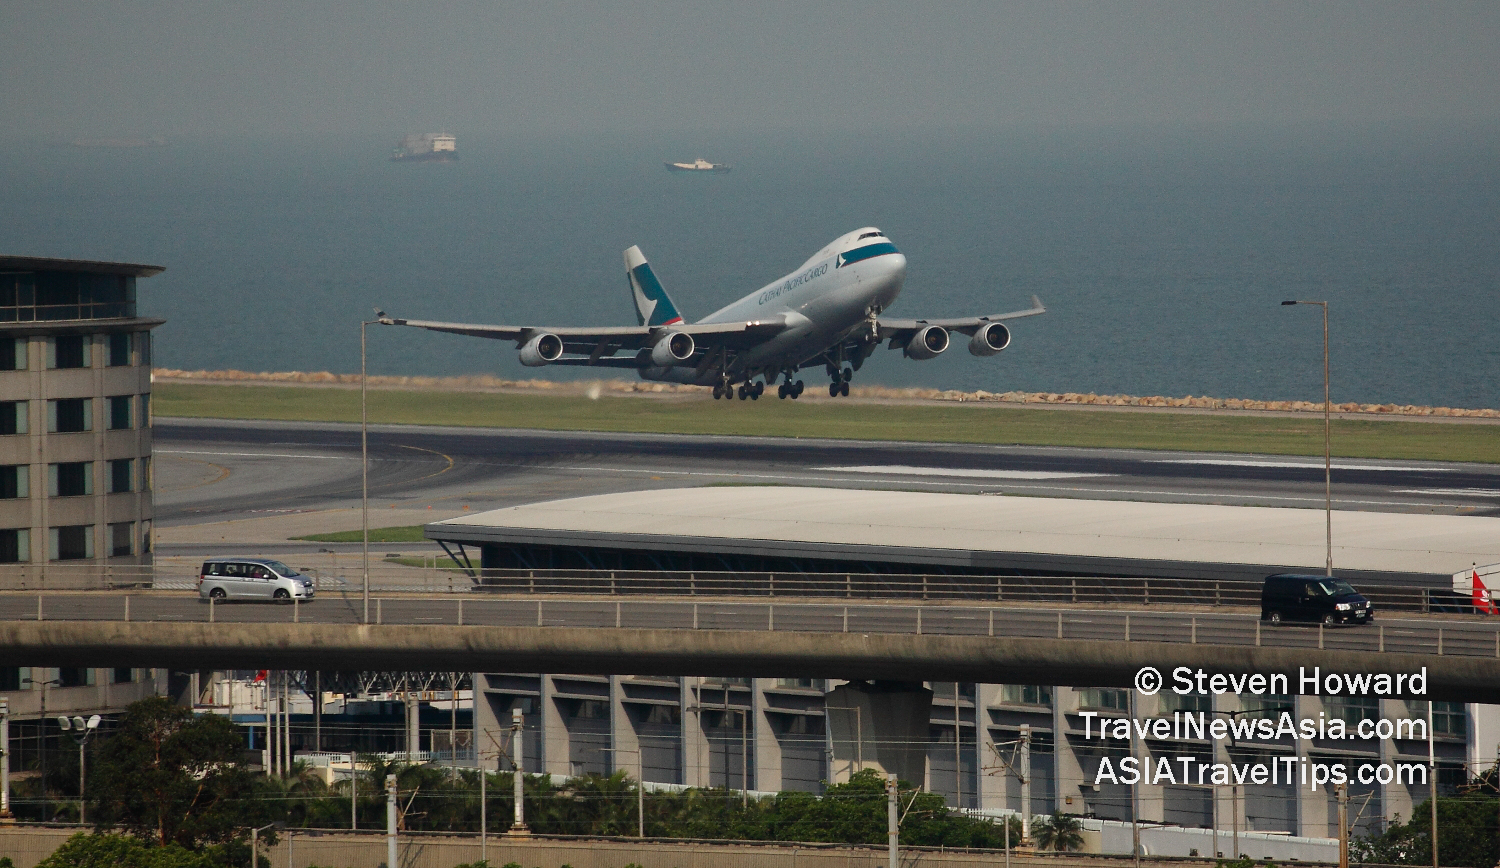 Cathay Pacific Boeing 747F taking off from Hong Kong International Airport (HKIA). Picture by Steven Howard of TravelNewsAsia.com Click to enlarge.